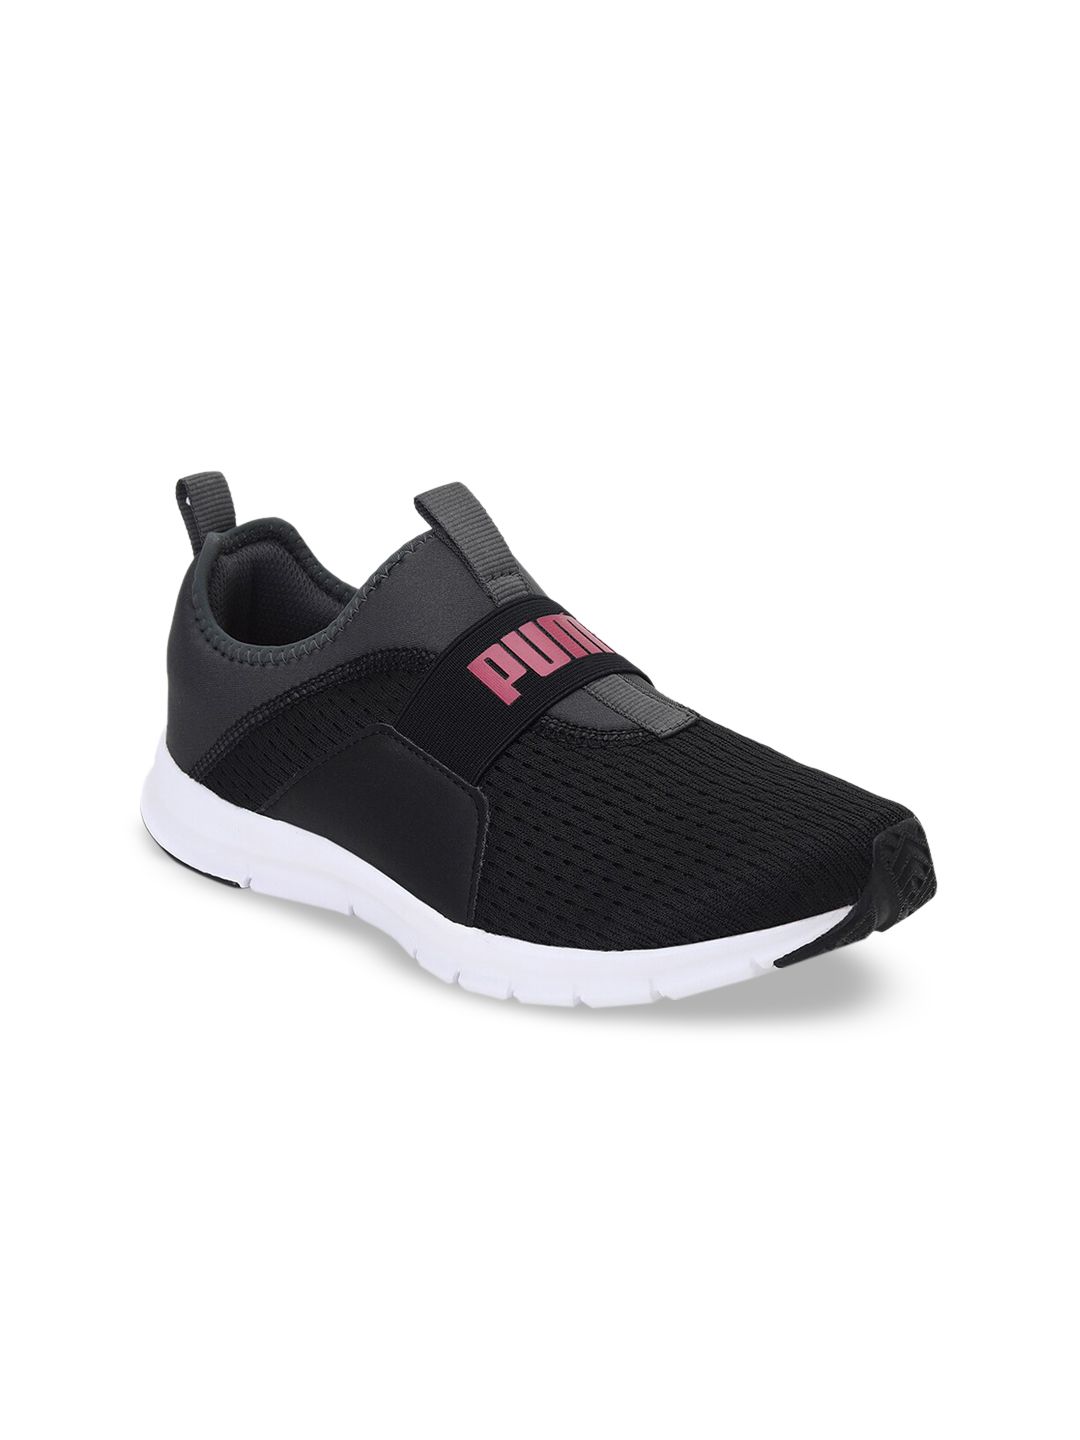 Puma Women Black Reck Wns Walking Shoes Price in India